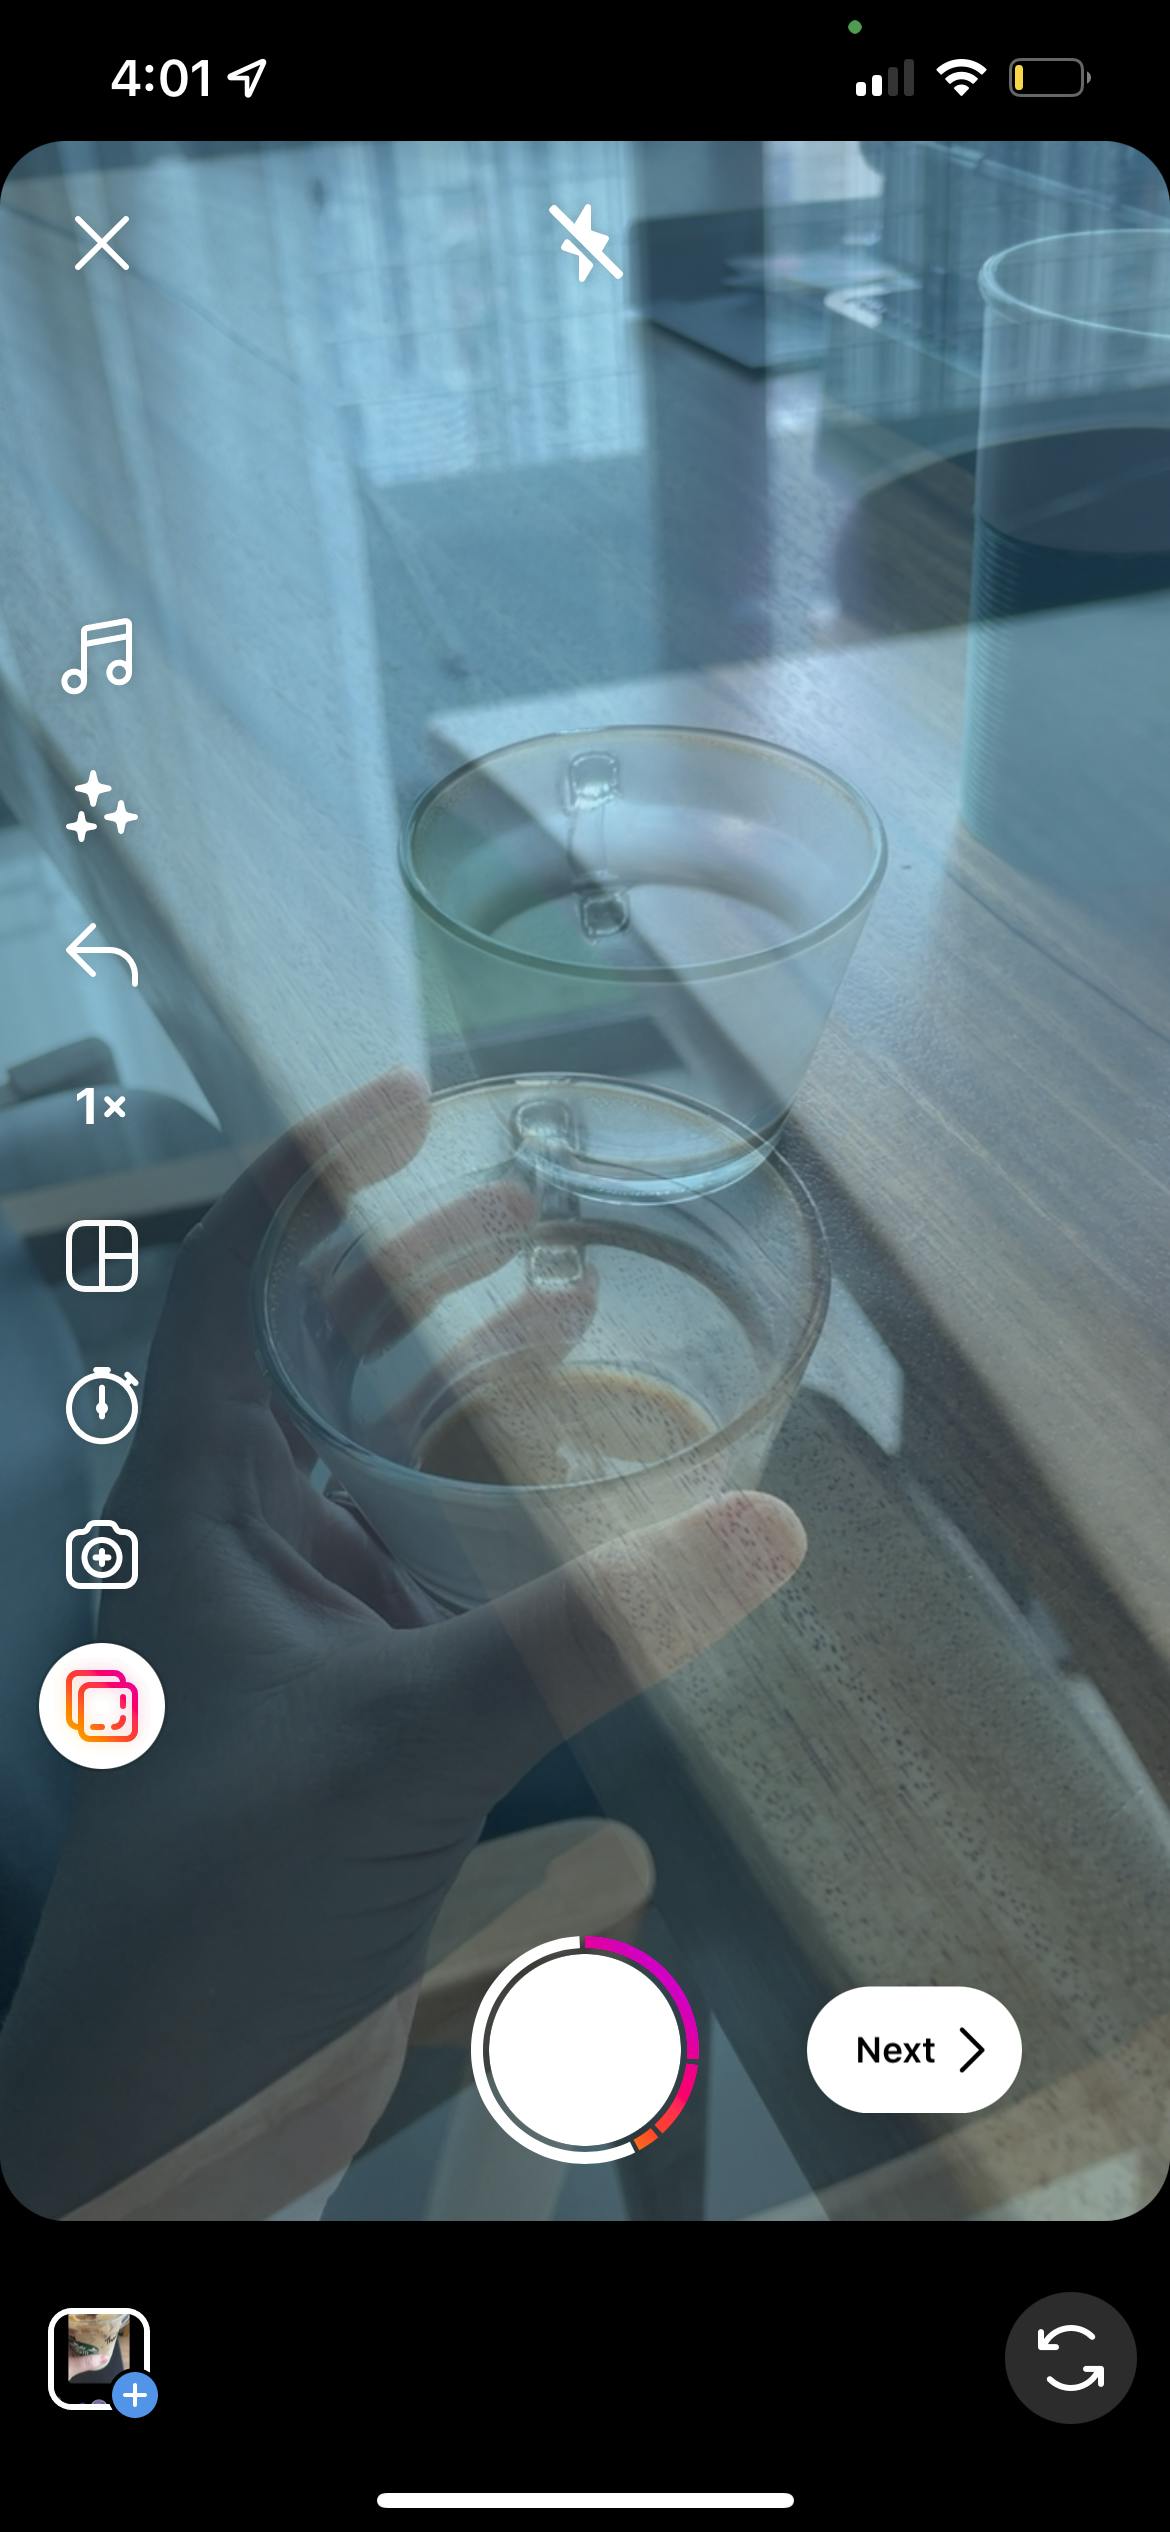 Instagram Reels Tips - Align button helps you make seamless transitions